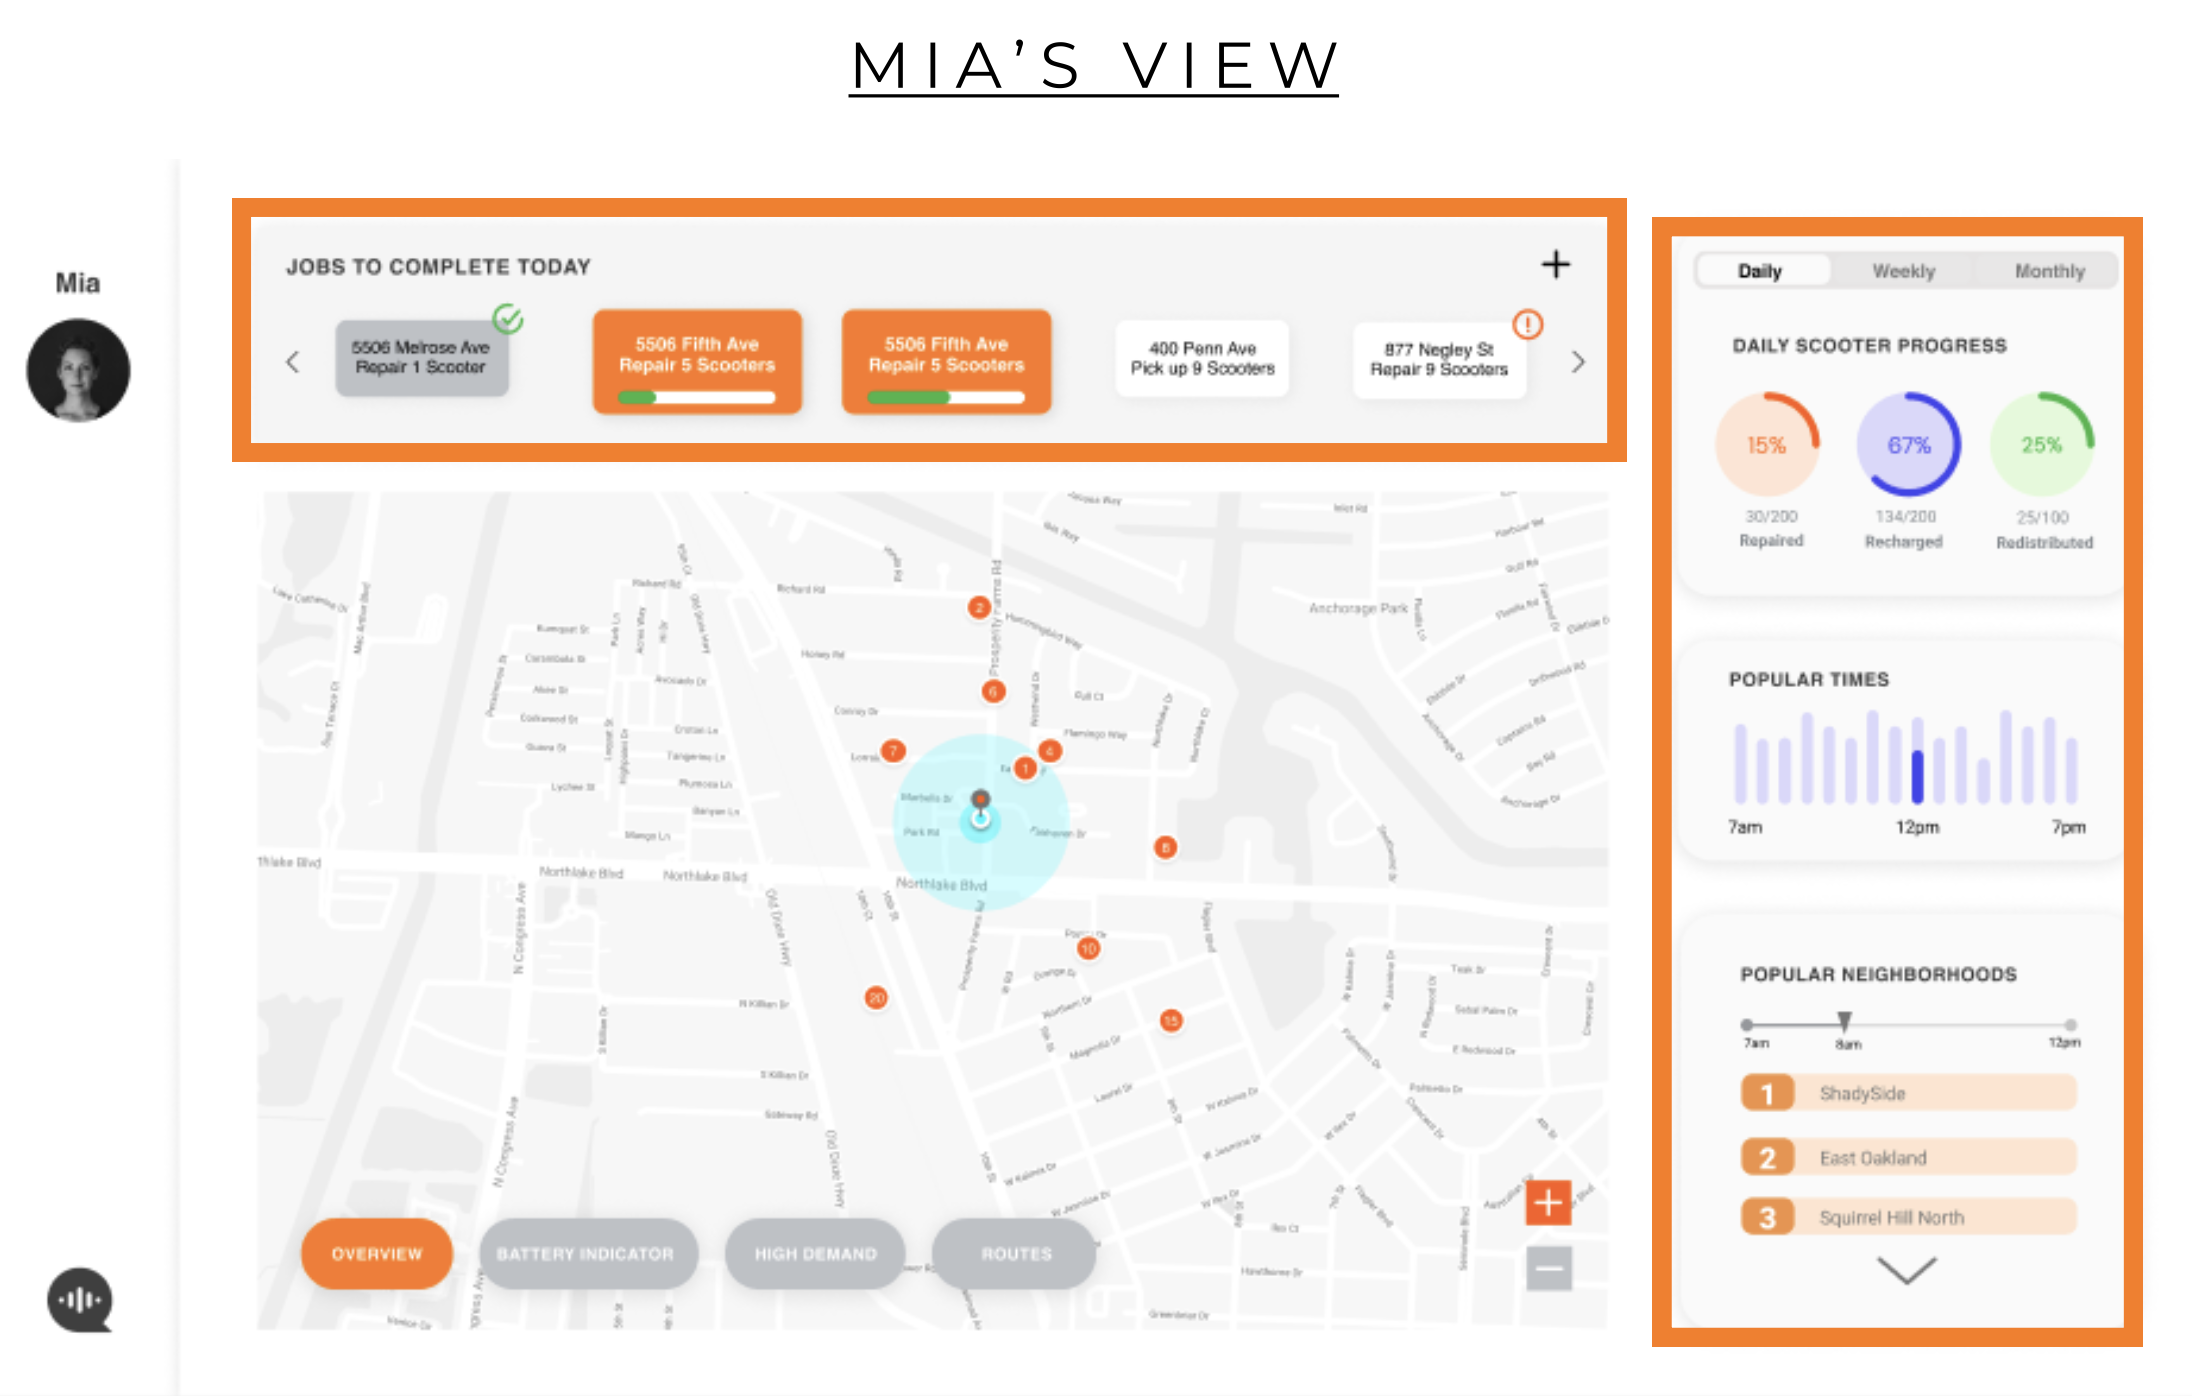 Main dashboard view for Mia the Data Analyist